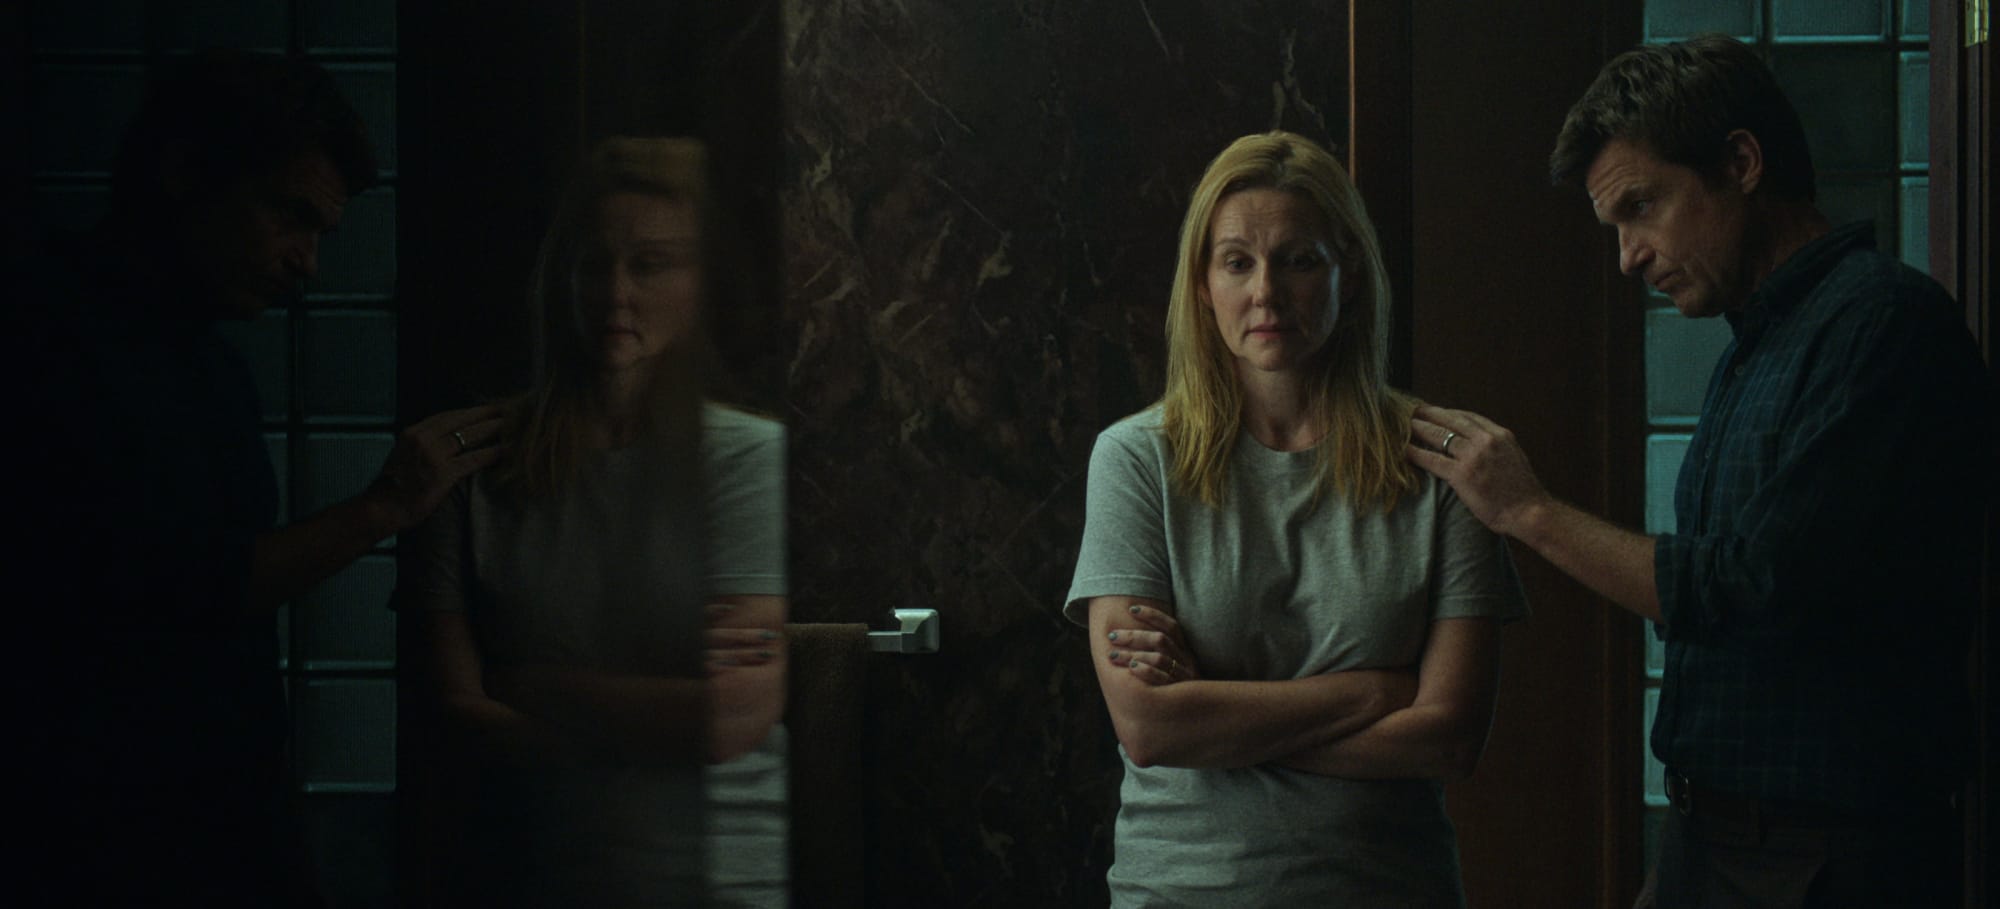 Ozark” Season 3 Review: Maybe There Is No Safe Future For the